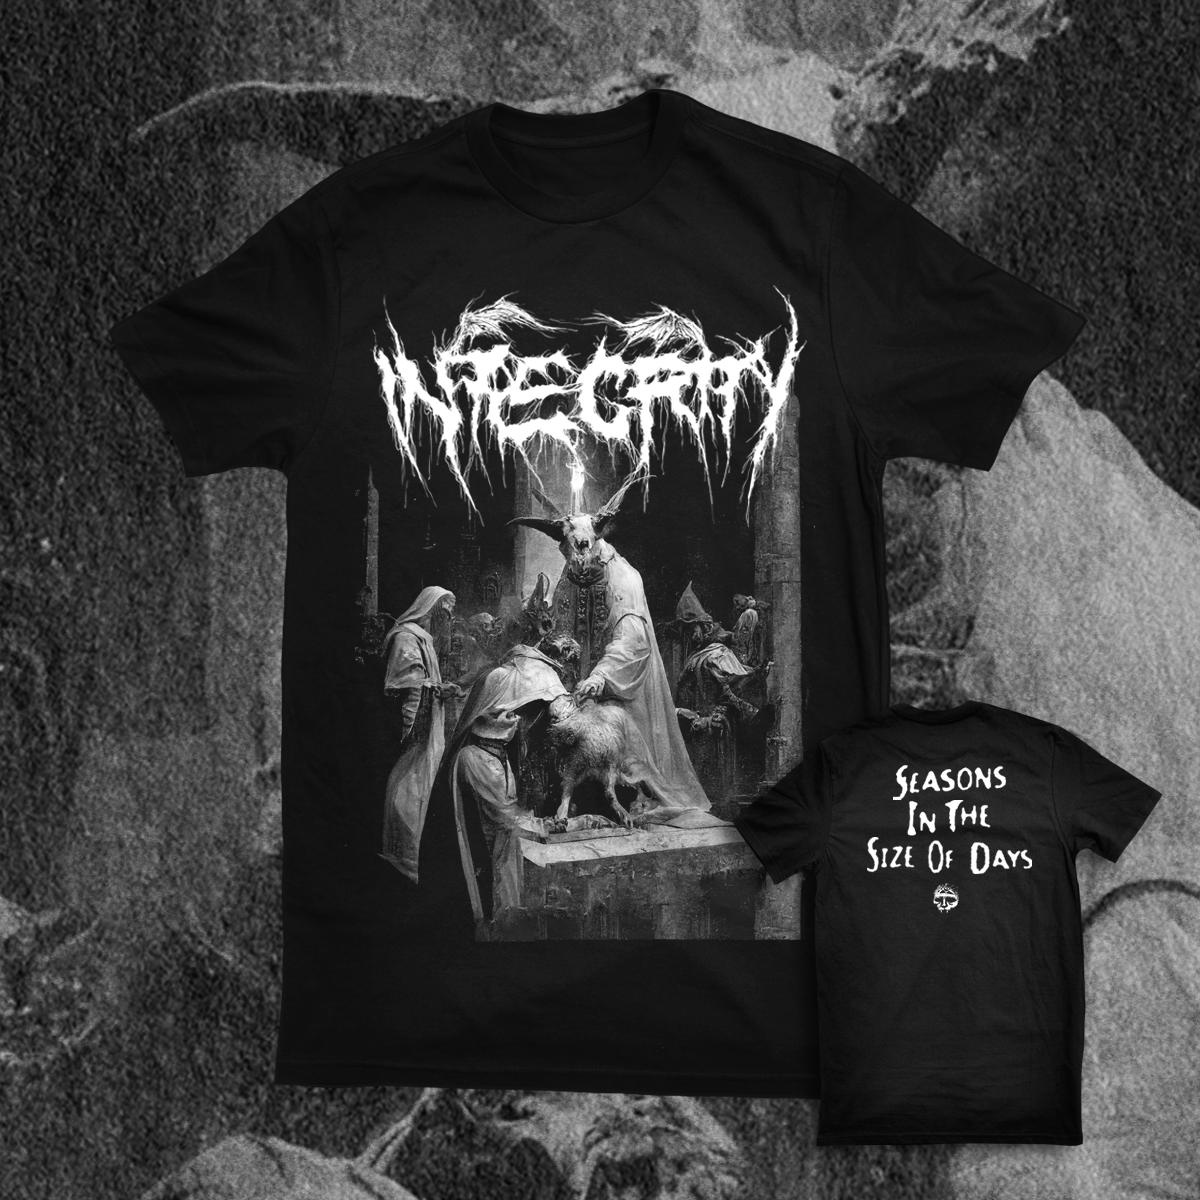 INTEGRITY "SEASONS IN THE SIZE OF DAYS" SHIRT (PRE ORDER)